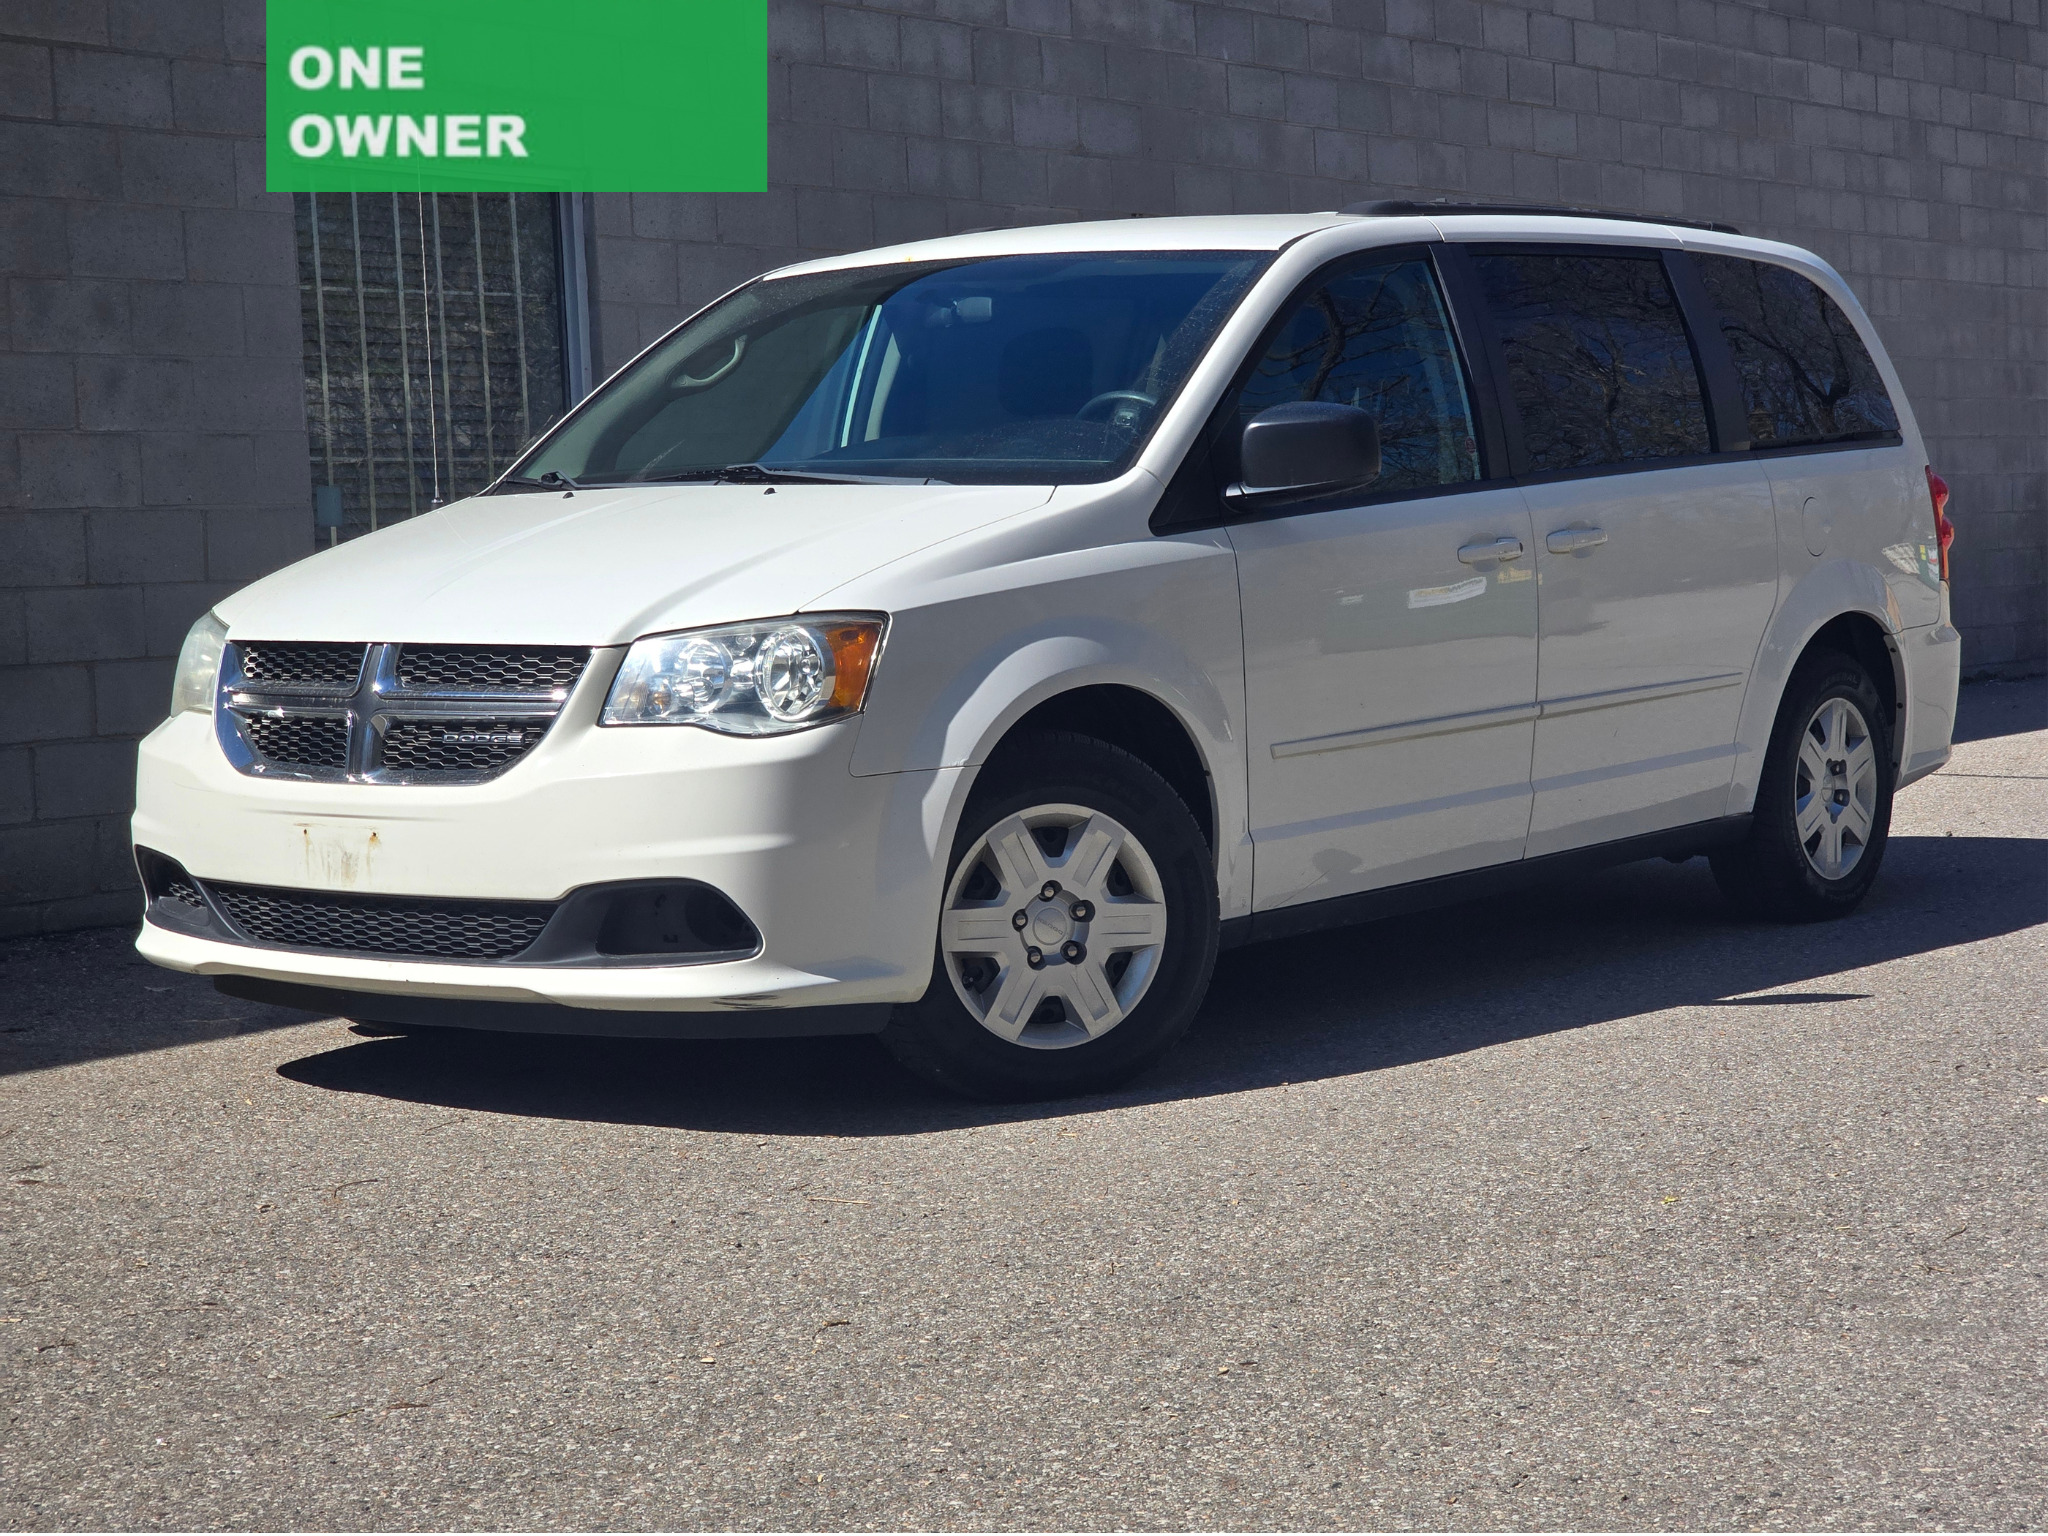 2011 Dodge Grand Caravan One Owner *ONLY 116,000 km's* Certified Smoke free